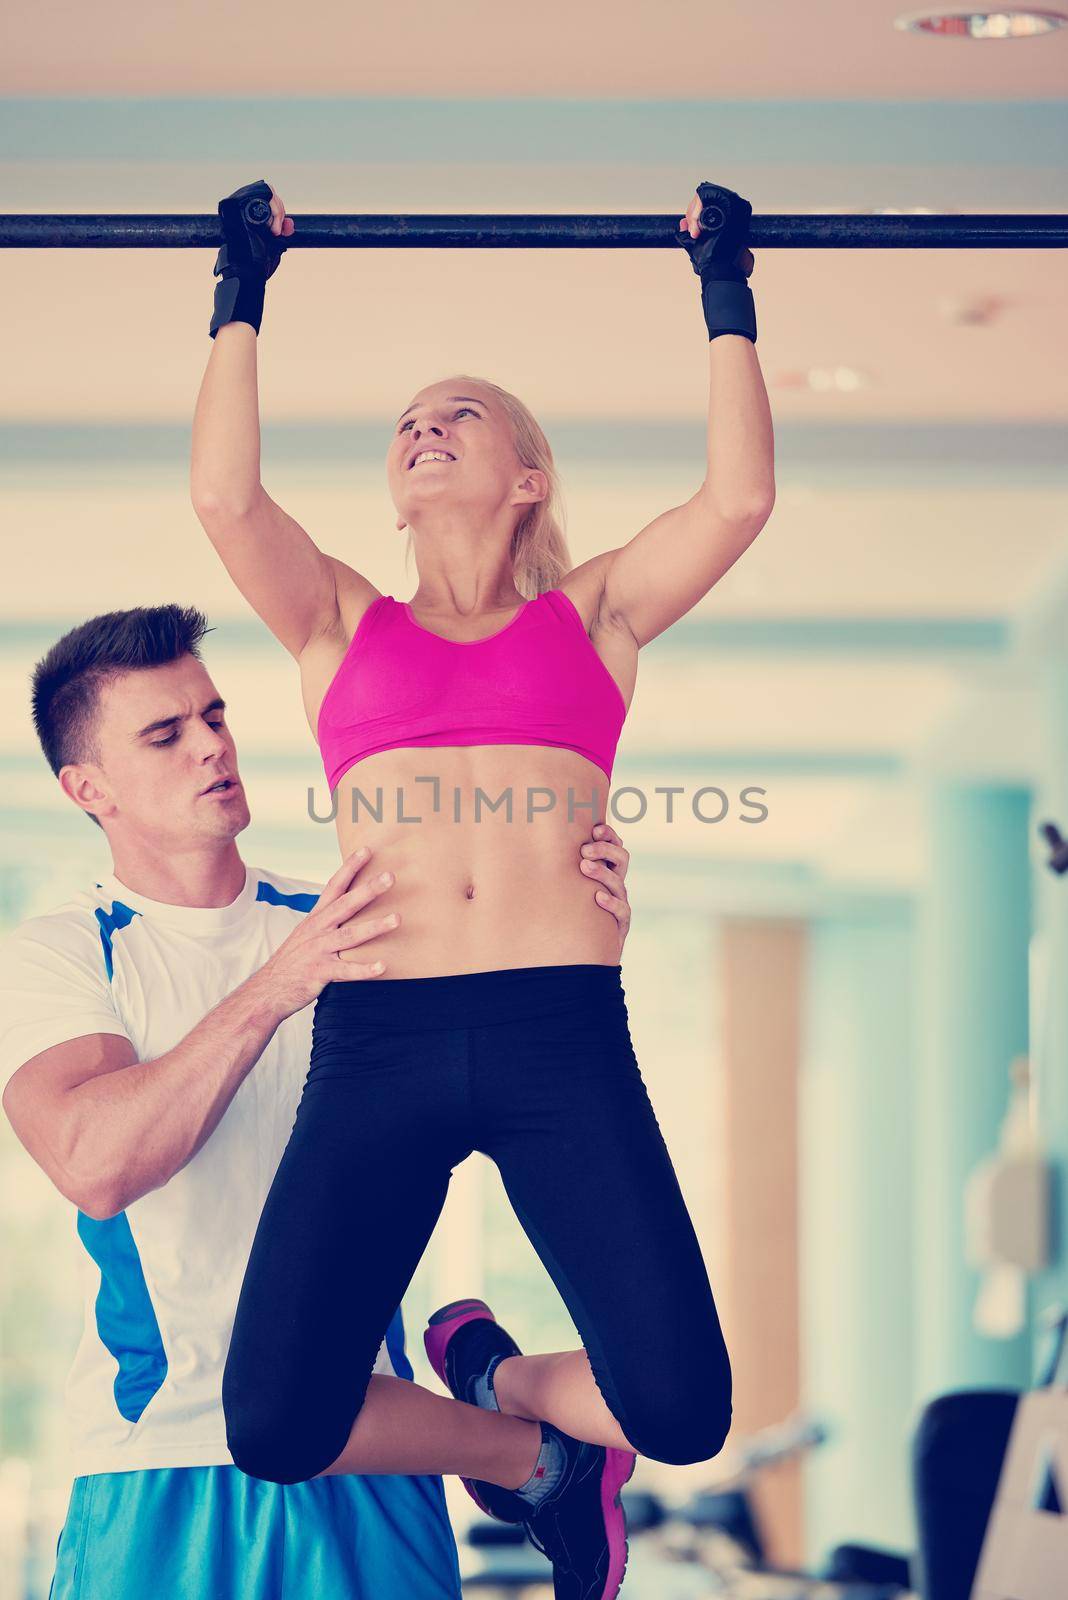 trainer support young woman while lifting on bar in fitness gym indoors